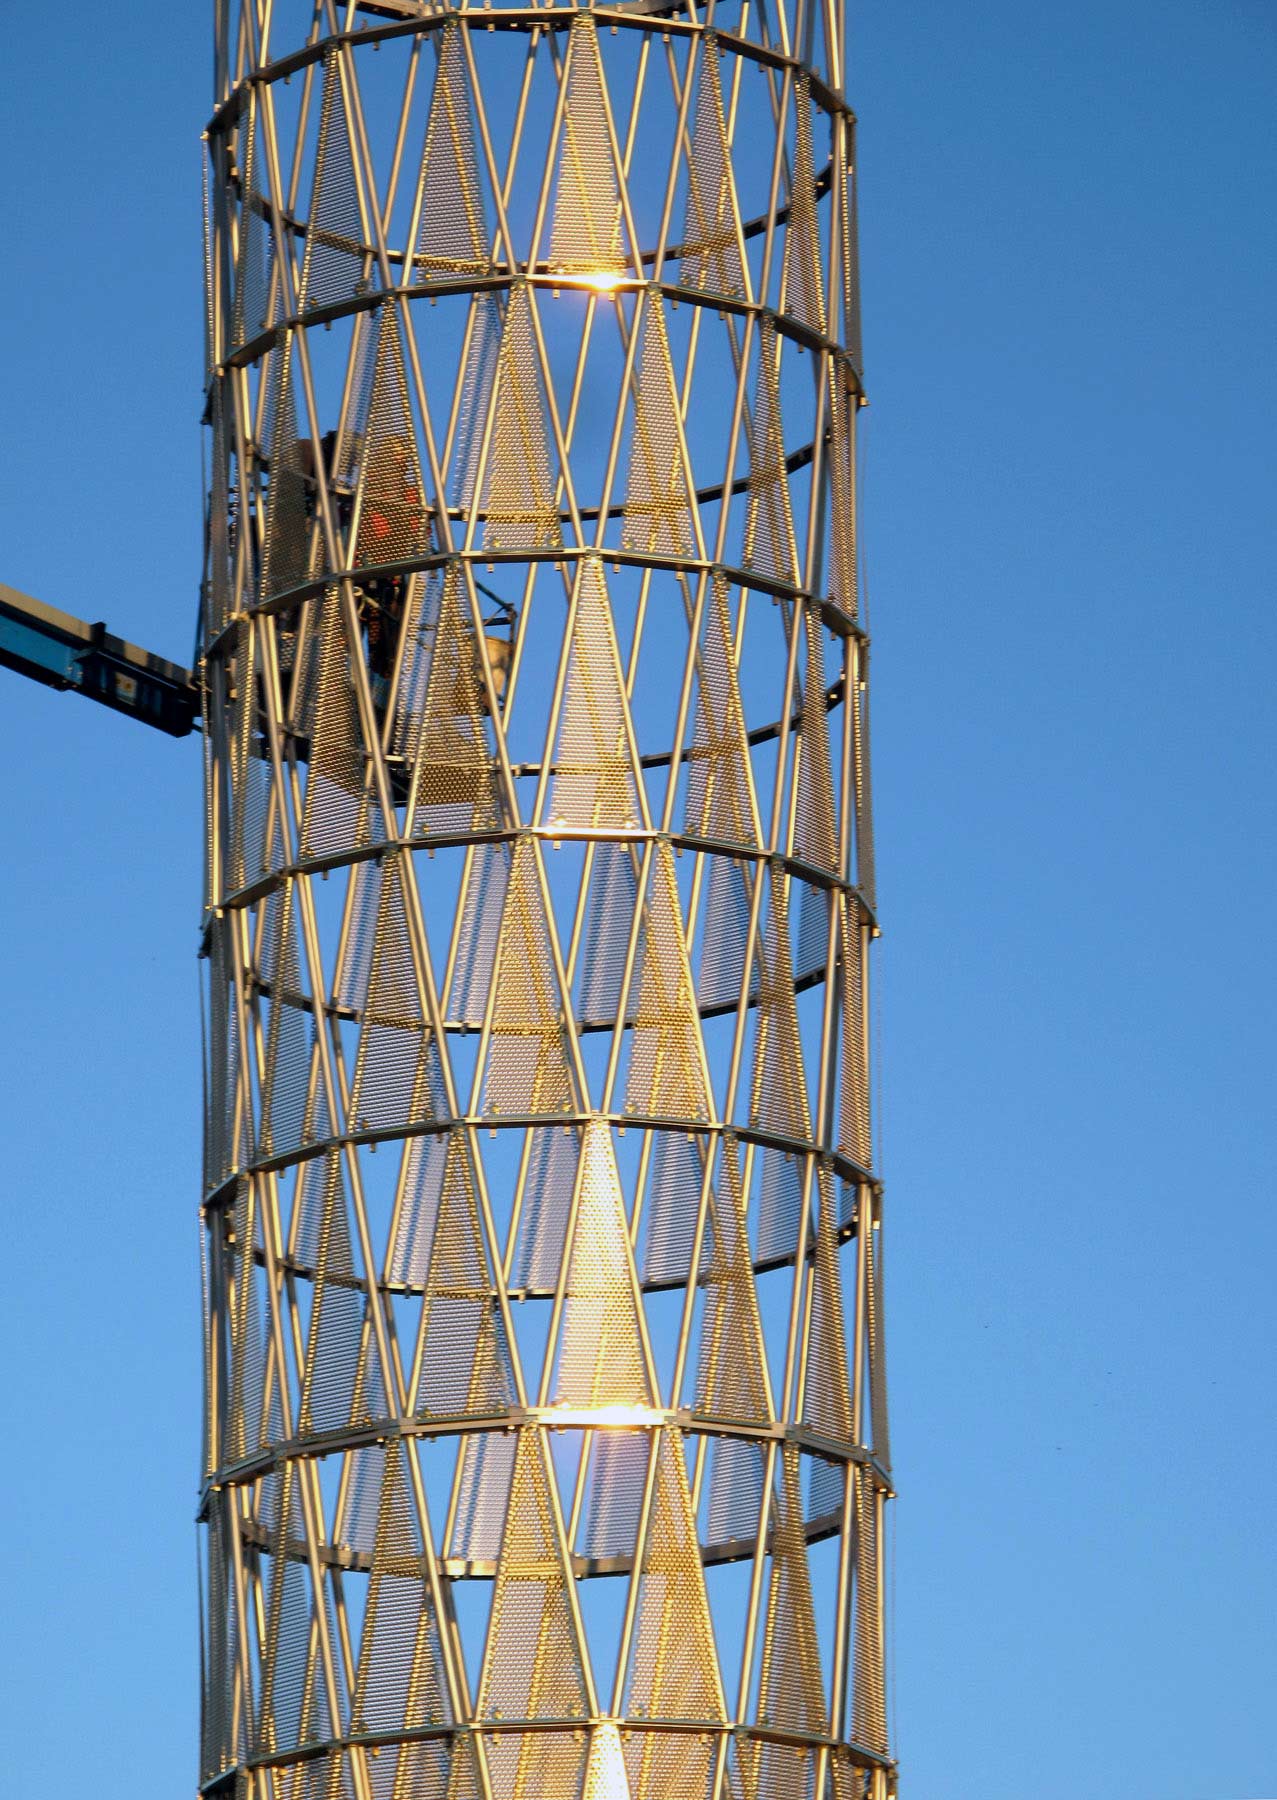 Gold-colored ti-coated stainless steel used on Hope Tower at UNMC.